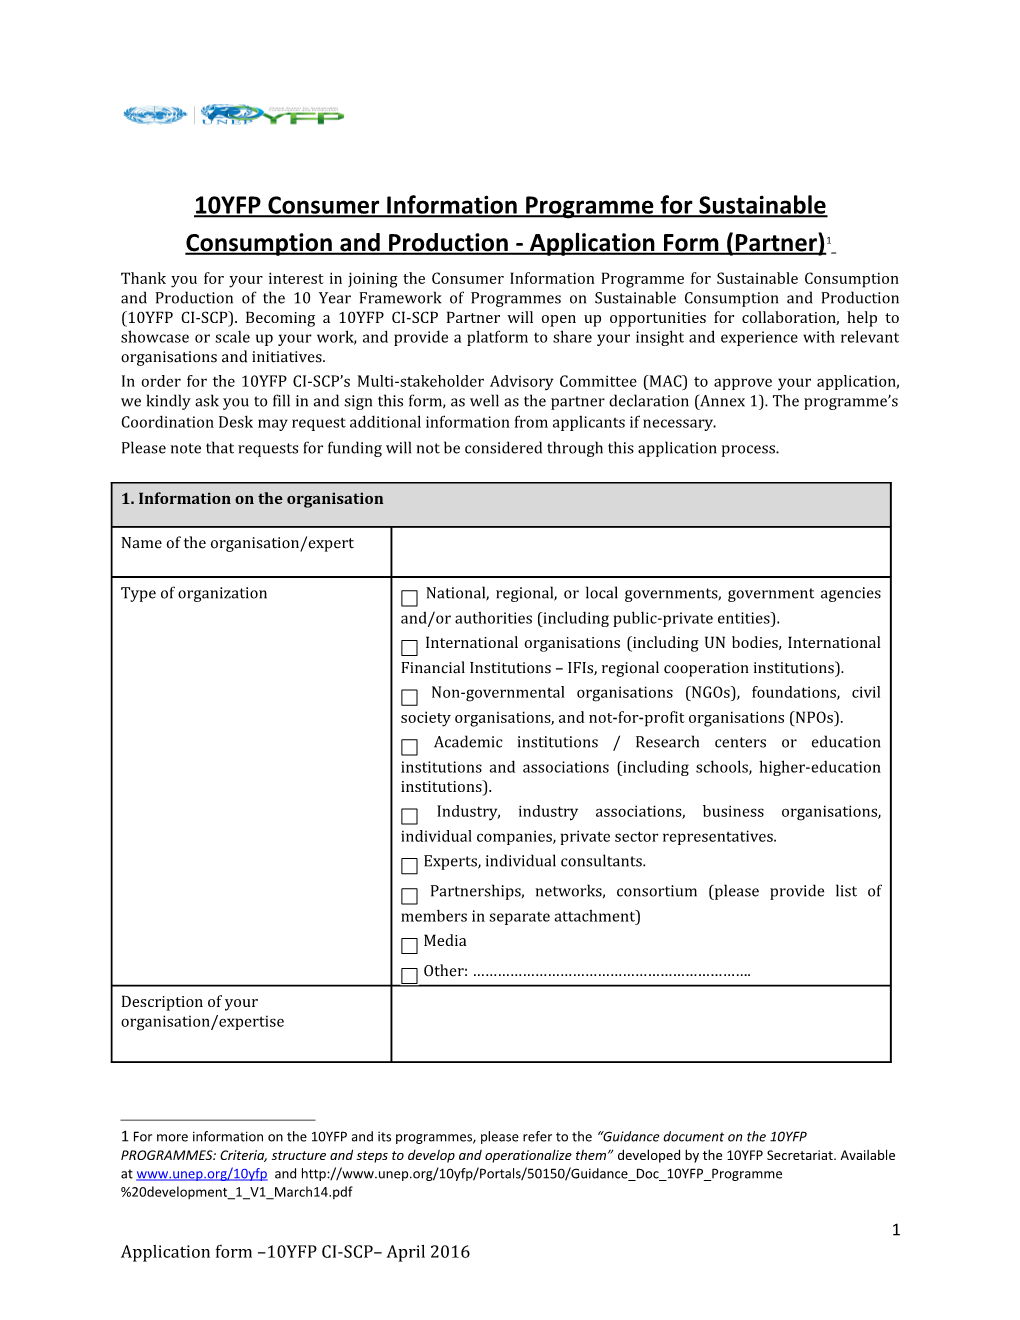 10YFP Consumer Information Programme for Sustainable Consumption and Production - Application